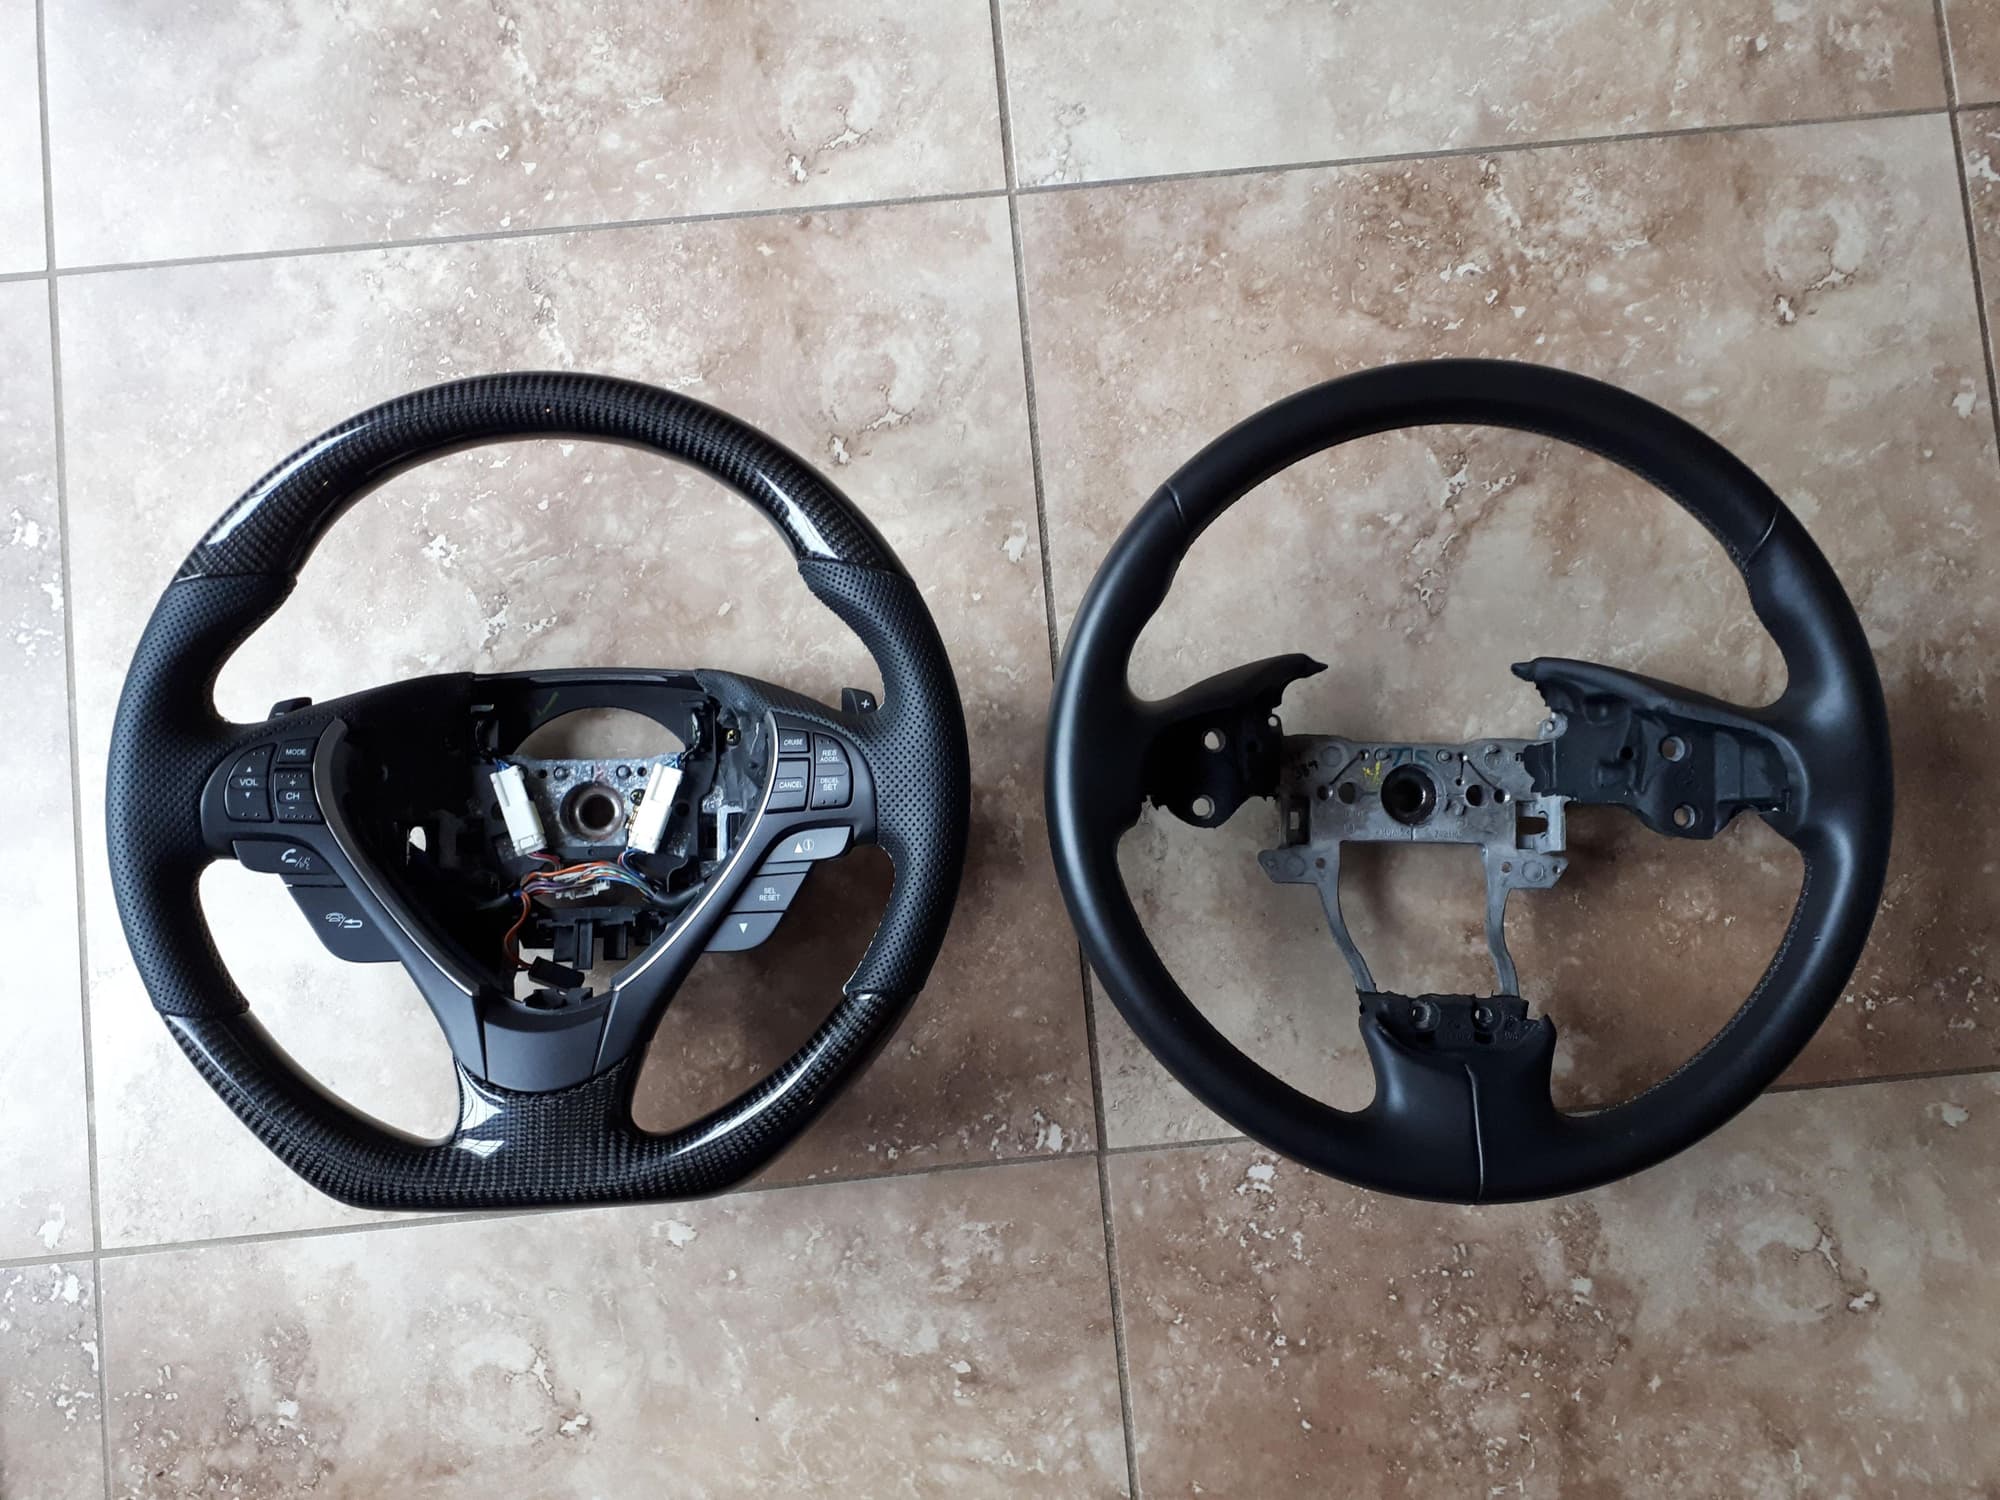 Interior/Upholstery - SOLD: Carbon Fiber/Leather Steering Wheel - Used - 2009 to 2014 Acura TL - Lawrencetown, NS B2Z1T9, Canada